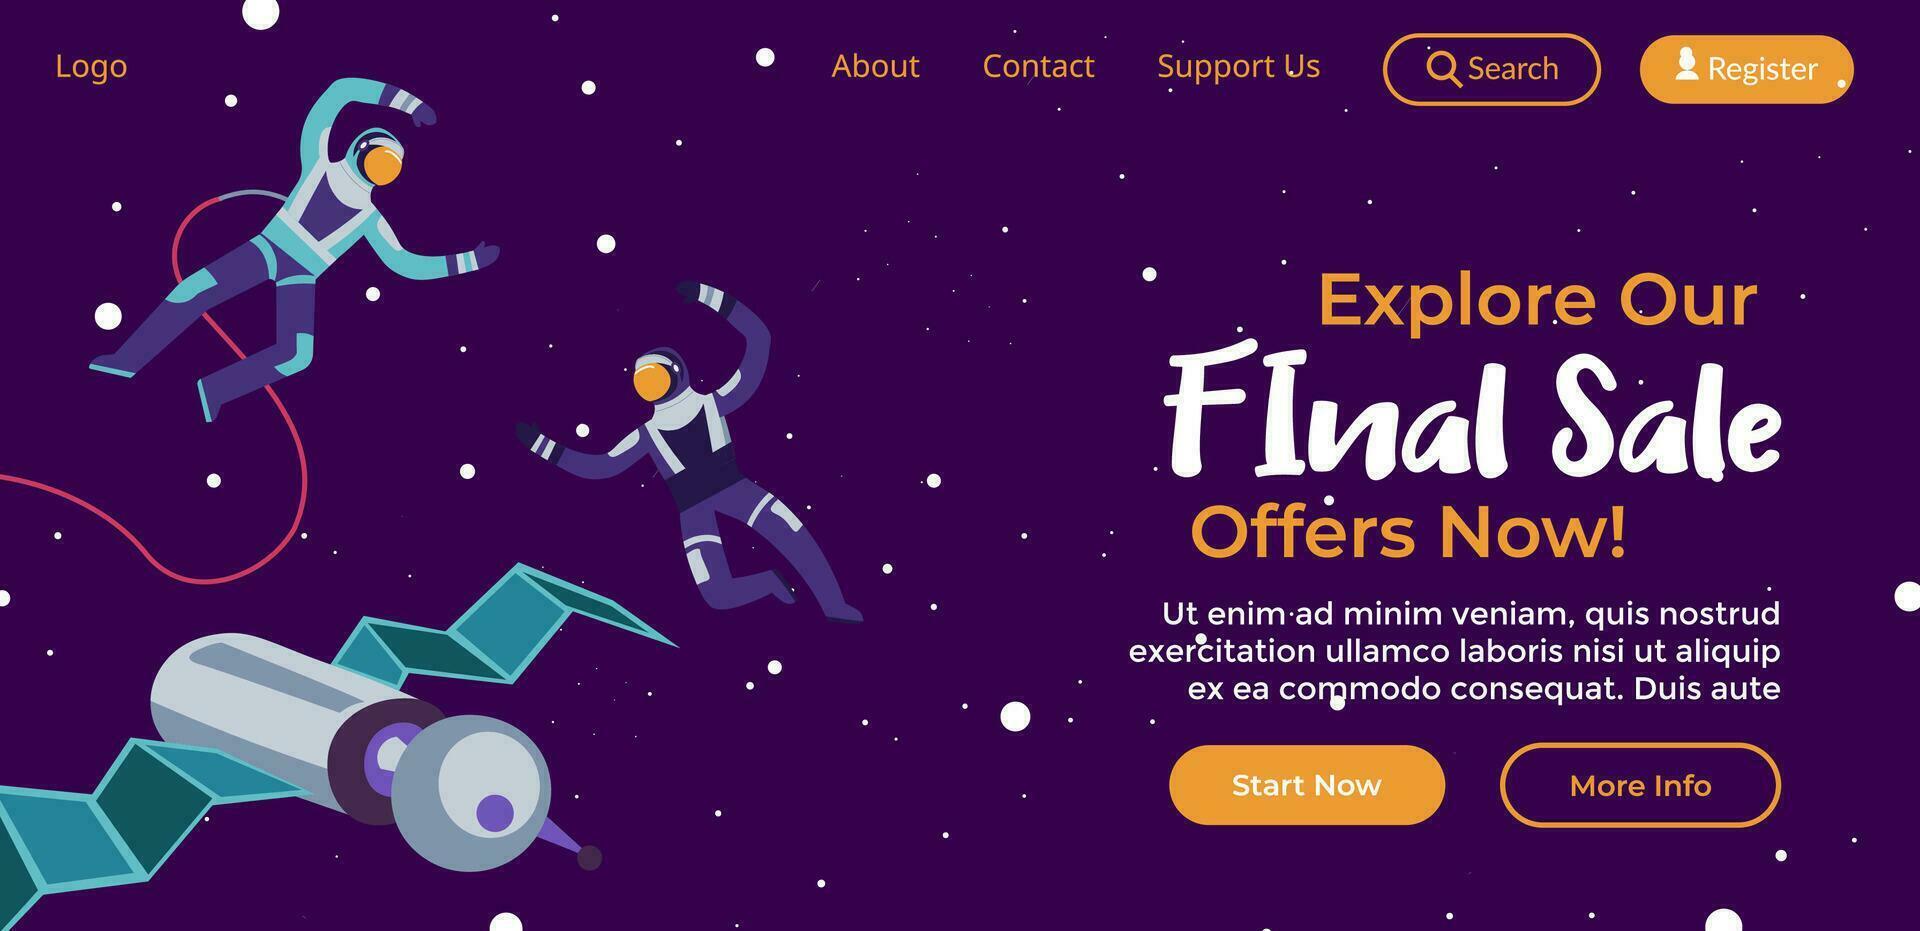 Explore our final sale, offers now website page vector